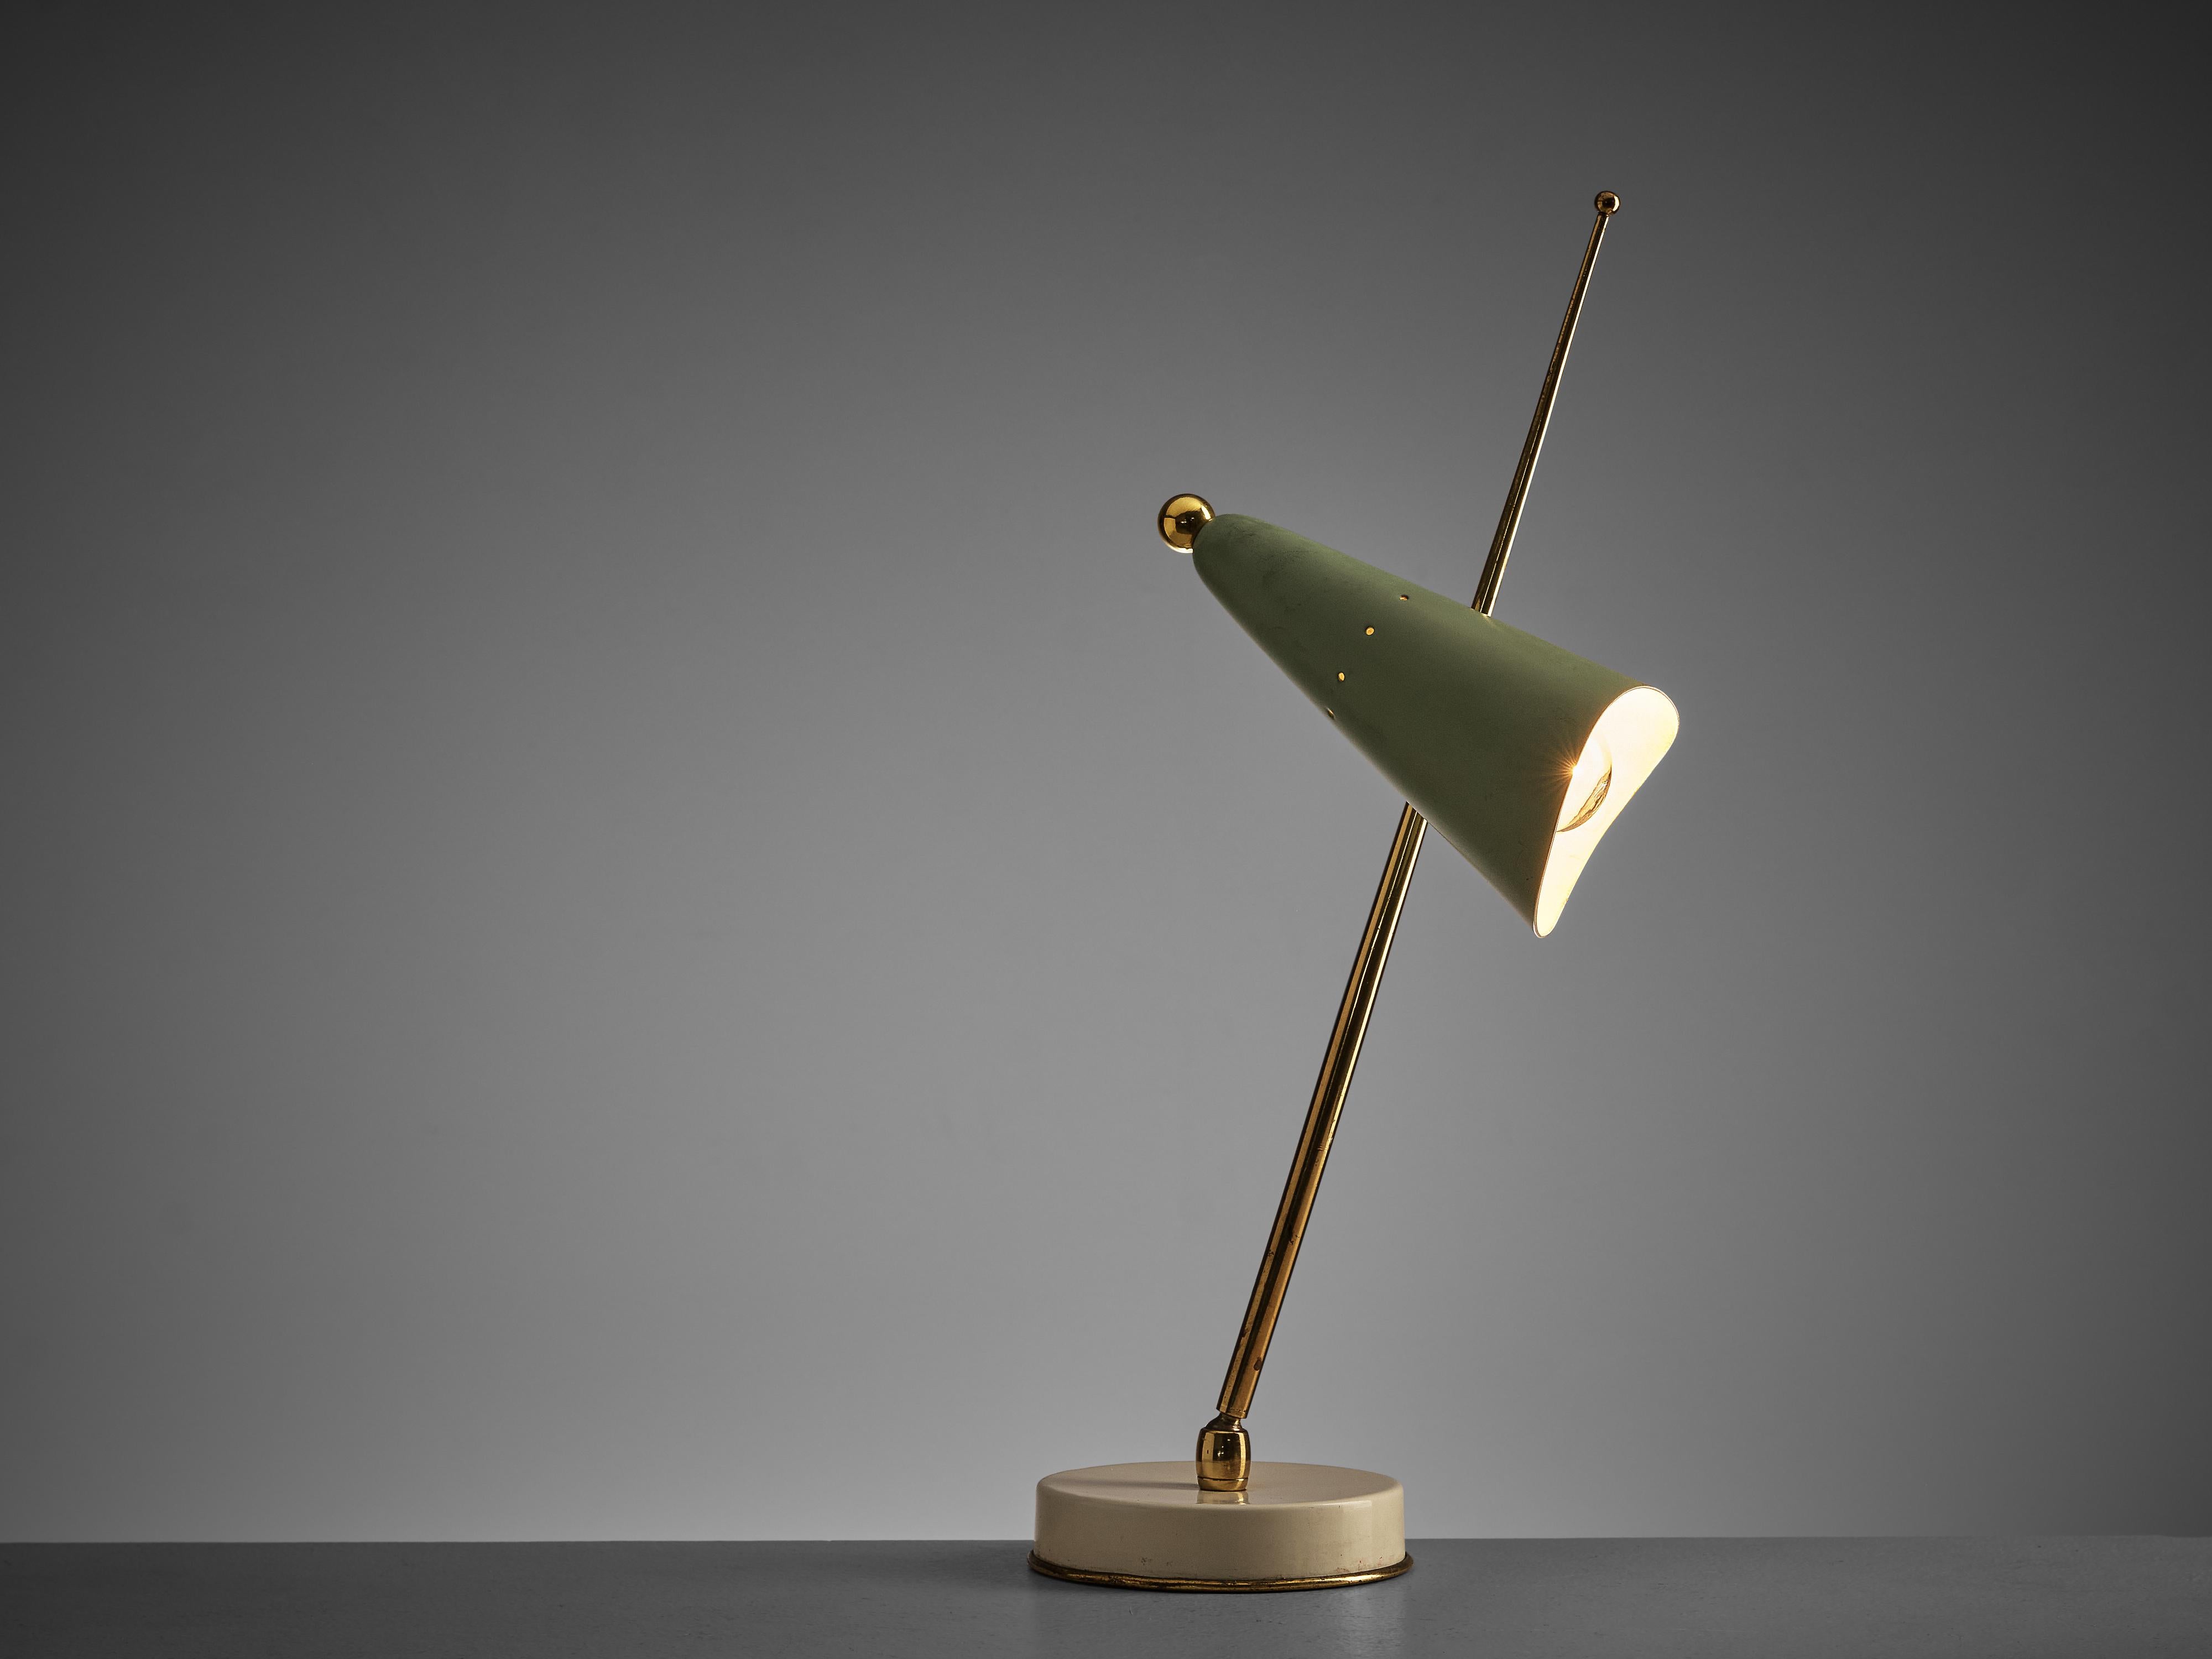 Adjustable table or desk lamp, brass, metal, aluminum, Italy, 1950s.

This lovely desk lamp shows the elegance of 1950s Italian design. On a white metal base with a brass bottom rests the adjustable stem. It ends on top with a sphere. The shade is